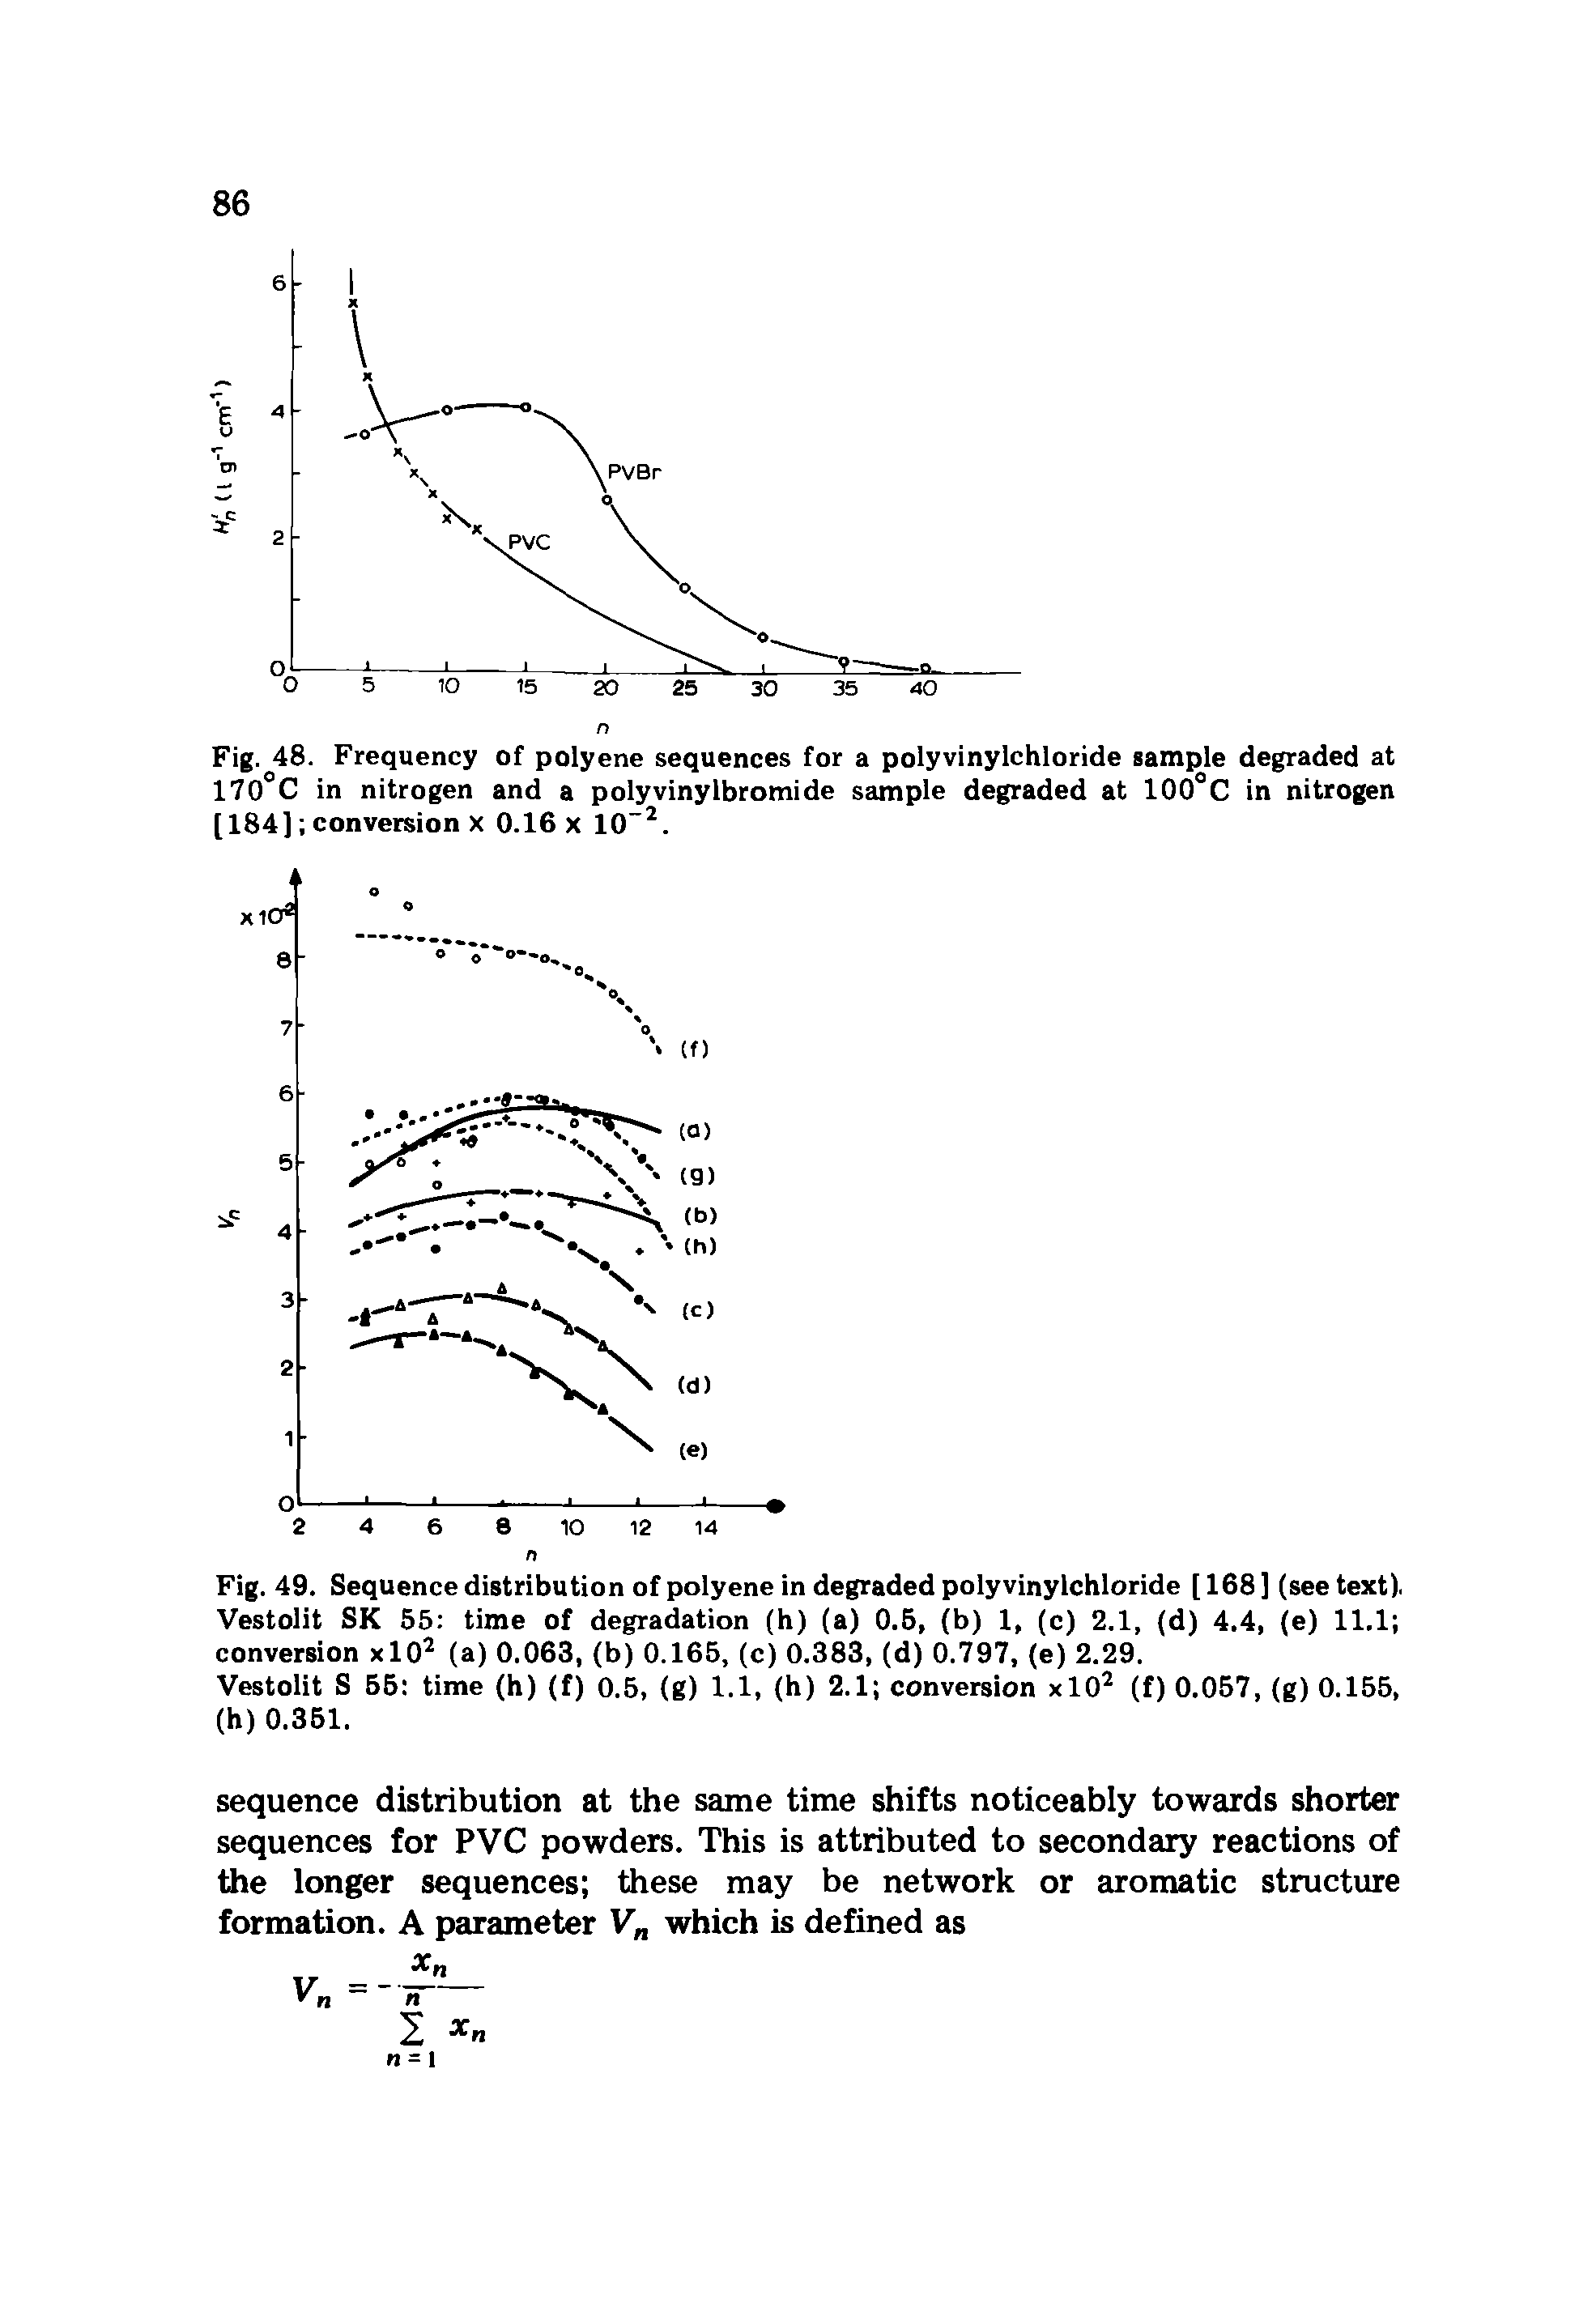 Fig. 48. Frequency of polyene sequences for a polyvinylchloride sample degraded at 170 C in nitrogen and a polyvinylbromide sample degraded at 100°C in nitrogen [184] conversion x 0.16 x 10 2.